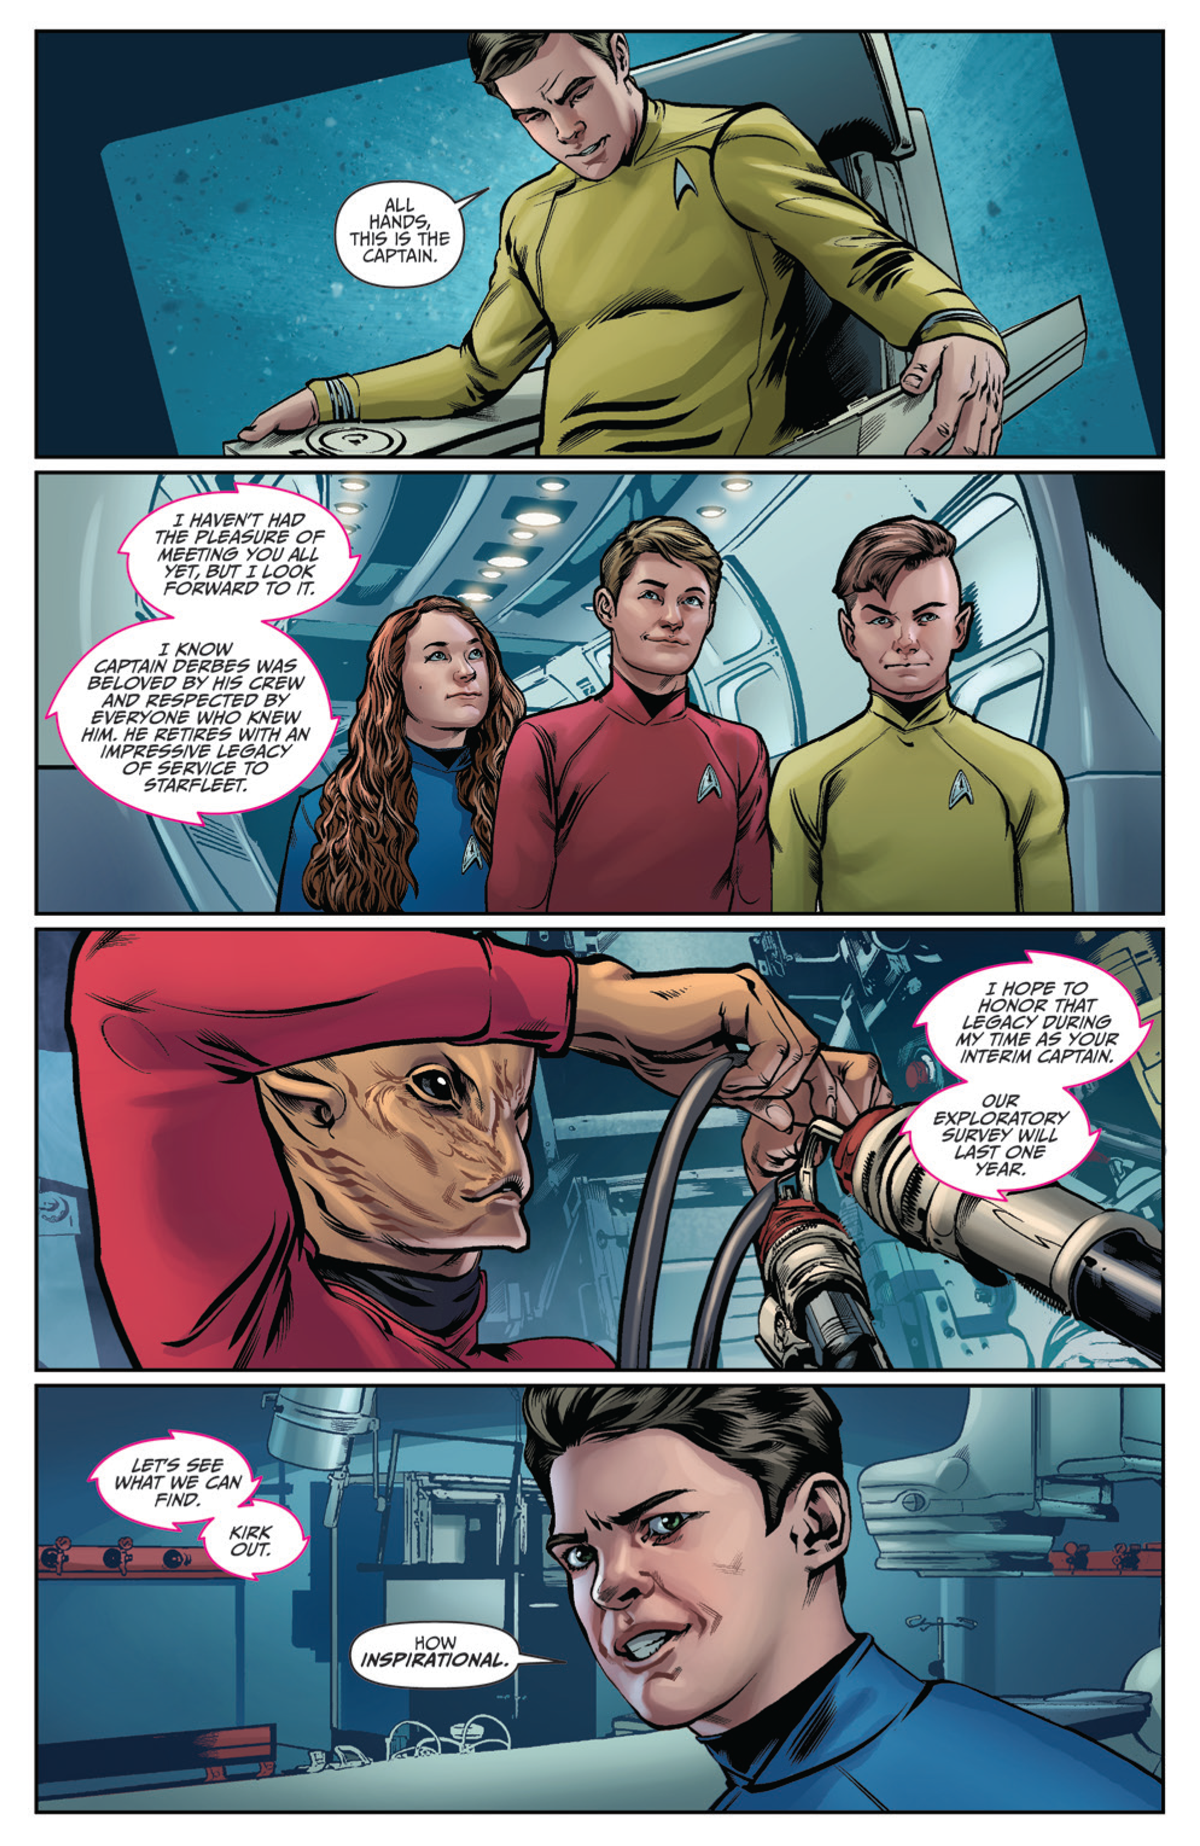 Captain Kirk Has A Surprising New Mission In The New Star Trek Comic